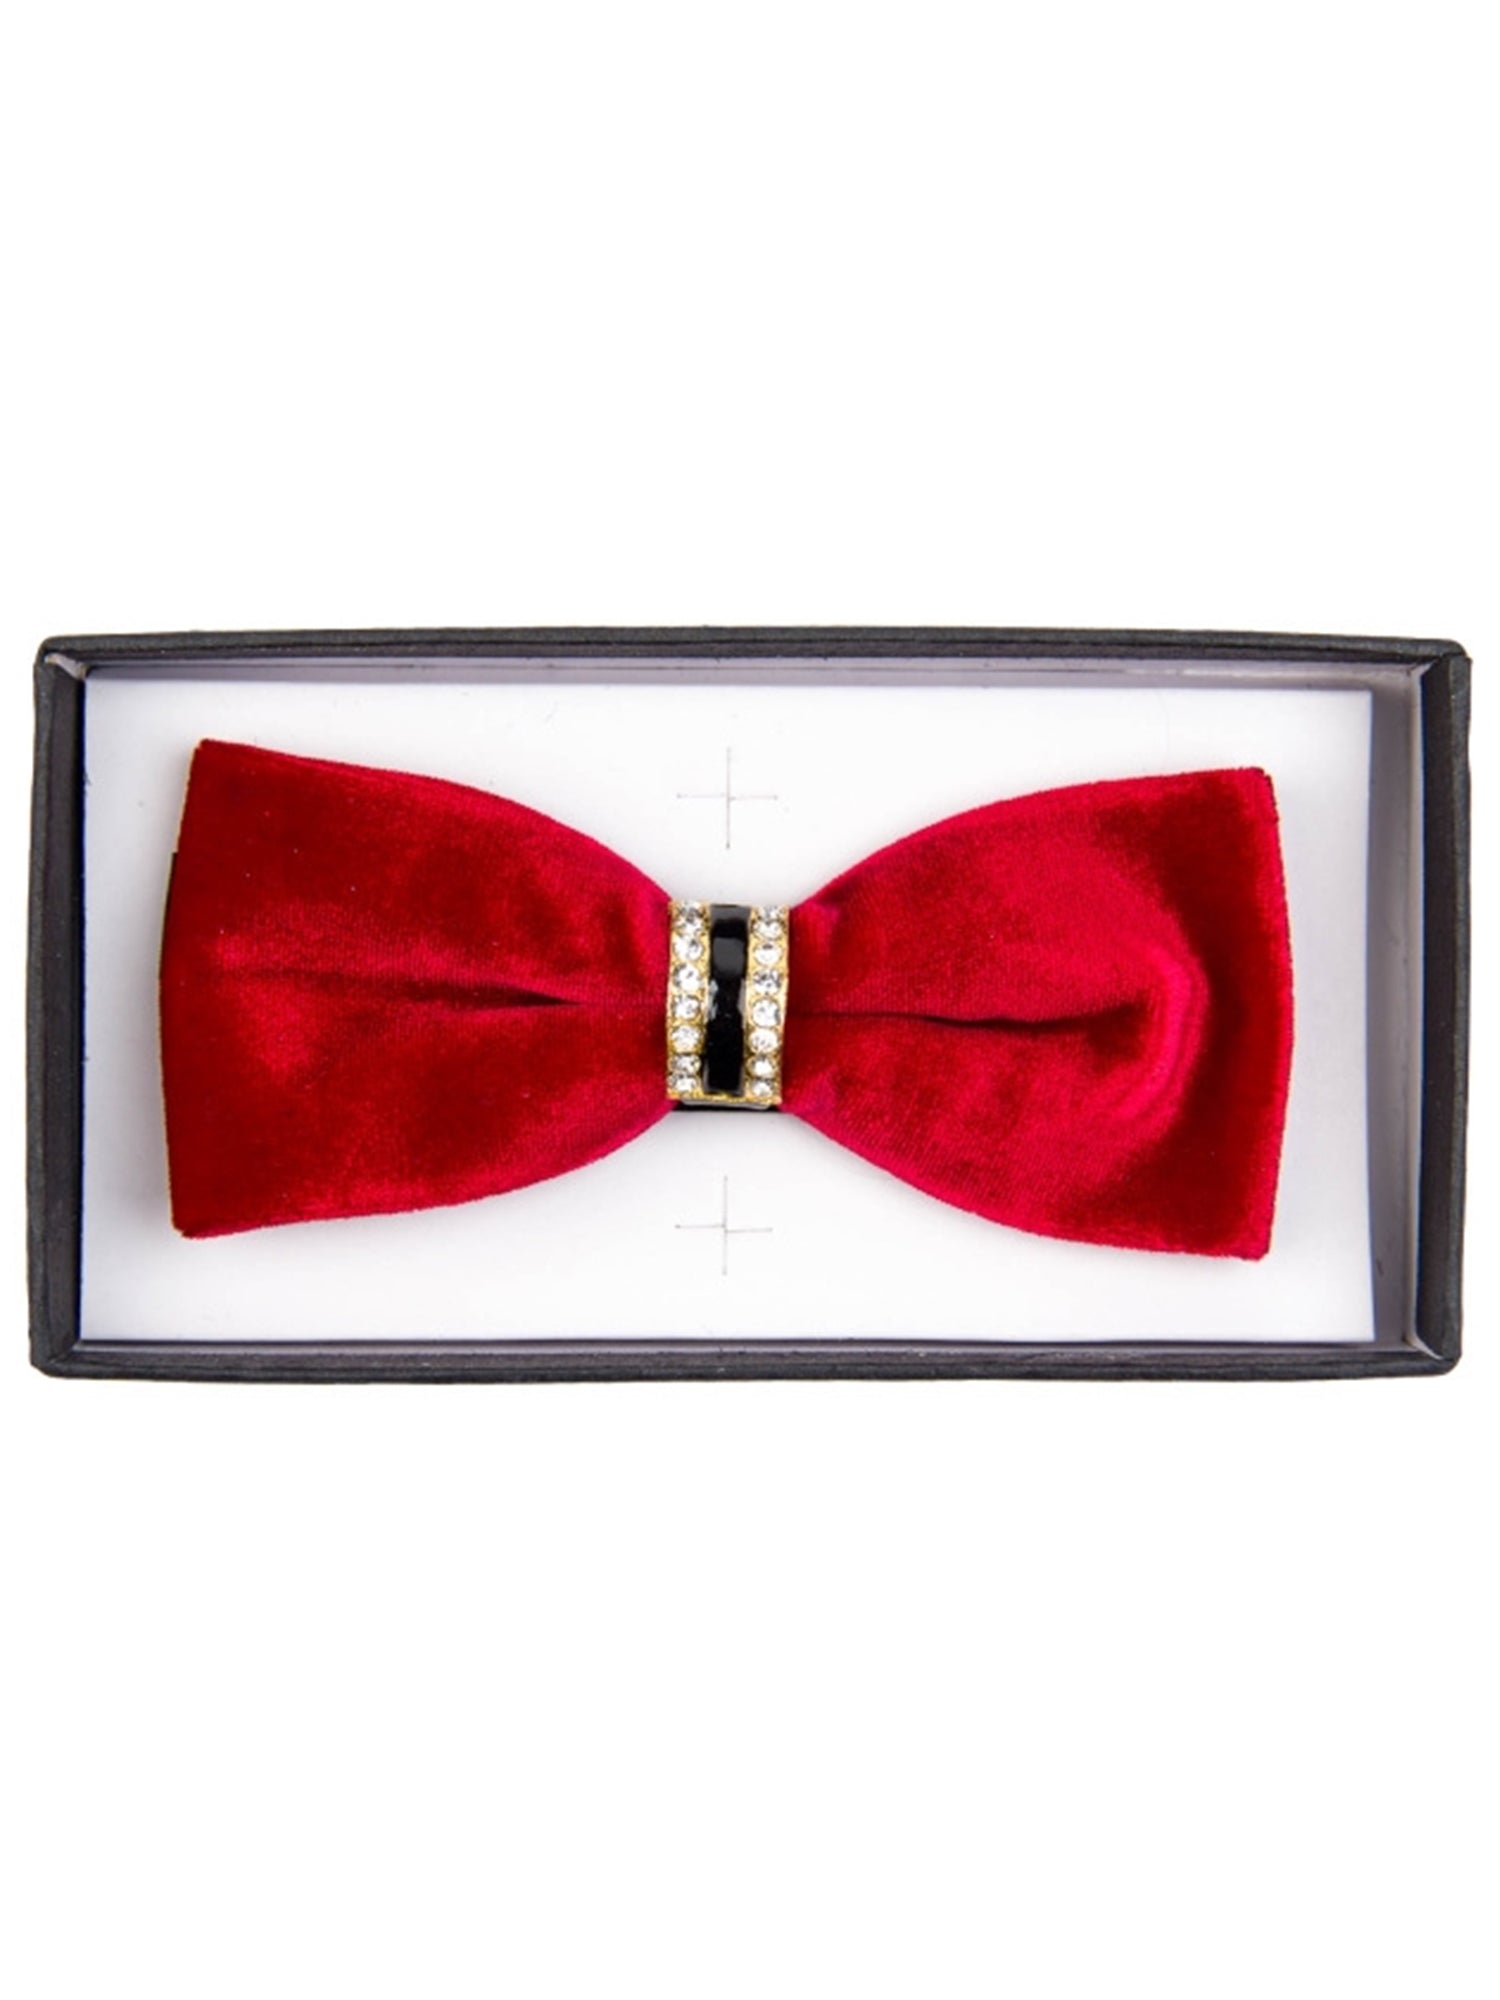 Men's Solid Color Velvet Pre-tied Adjustable Length Bow Tie with Rhinestone Men's Solid Color Bow Tie TheDapperTie Red One Size 